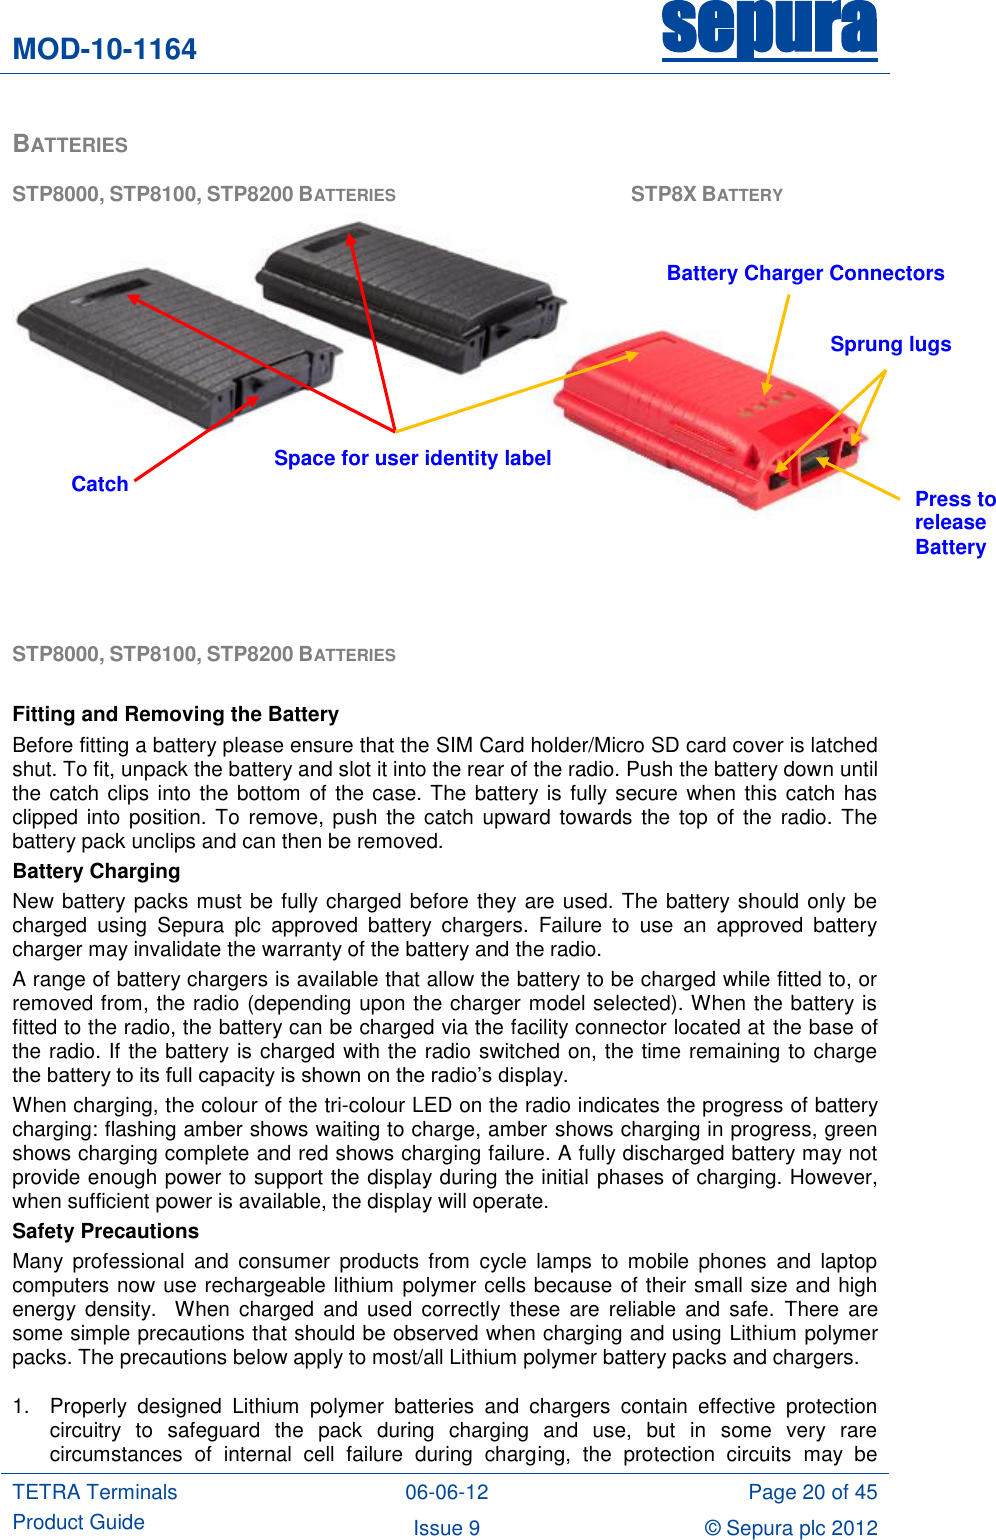 MOD-10-1164 sepura  TETRA Terminals Product Guide 06-06-12 Page 20 of 45 Issue 9 © Sepura plc 2012   BATTERIES STP8000, STP8100, STP8200 BATTERIES          STP8X BATTERY    STP8000, STP8100, STP8200 BATTERIES   Fitting and Removing the Battery Before fitting a battery please ensure that the SIM Card holder/Micro SD card cover is latched shut. To fit, unpack the battery and slot it into the rear of the radio. Push the battery down until the catch clips into the bottom of the case. The battery is fully secure when this catch has clipped into  position. To remove, push the  catch upward towards  the  top of  the radio. The battery pack unclips and can then be removed. Battery Charging New battery packs must be fully charged before they are used. The battery should only be charged  using  Sepura  plc  approved  battery  chargers.  Failure  to  use  an  approved  battery charger may invalidate the warranty of the battery and the radio. A range of battery chargers is available that allow the battery to be charged while fitted to, or removed from, the radio (depending upon the charger model selected). When the battery is fitted to the radio, the battery can be charged via the facility connector located at the base of the radio. If the battery is charged with the radio switched on, the time remaining to charge the battery to its full capacity is shown on the radio‟s display. When charging, the colour of the tri-colour LED on the radio indicates the progress of battery charging: flashing amber shows waiting to charge, amber shows charging in progress, green shows charging complete and red shows charging failure. A fully discharged battery may not provide enough power to support the display during the initial phases of charging. However, when sufficient power is available, the display will operate. Safety Precautions Many  professional  and  consumer  products  from  cycle  lamps  to mobile phones  and  laptop computers now use rechargeable lithium polymer cells because of their small size and high energy  density.    When  charged  and  used  correctly  these are  reliable and  safe.  There  are some simple precautions that should be observed when charging and using Lithium polymer packs. The precautions below apply to most/all Lithium polymer battery packs and chargers. 1.  Properly  designed  Lithium  polymer  batteries  and  chargers  contain  effective  protection circuitry  to  safeguard  the  pack  during  charging  and  use,  but  in  some  very  rare circumstances  of  internal  cell  failure  during  charging,  the  protection  circuits  may  be Space for user identity label Battery Charger Connectors Press to release Battery   Sprung lugs Catch 